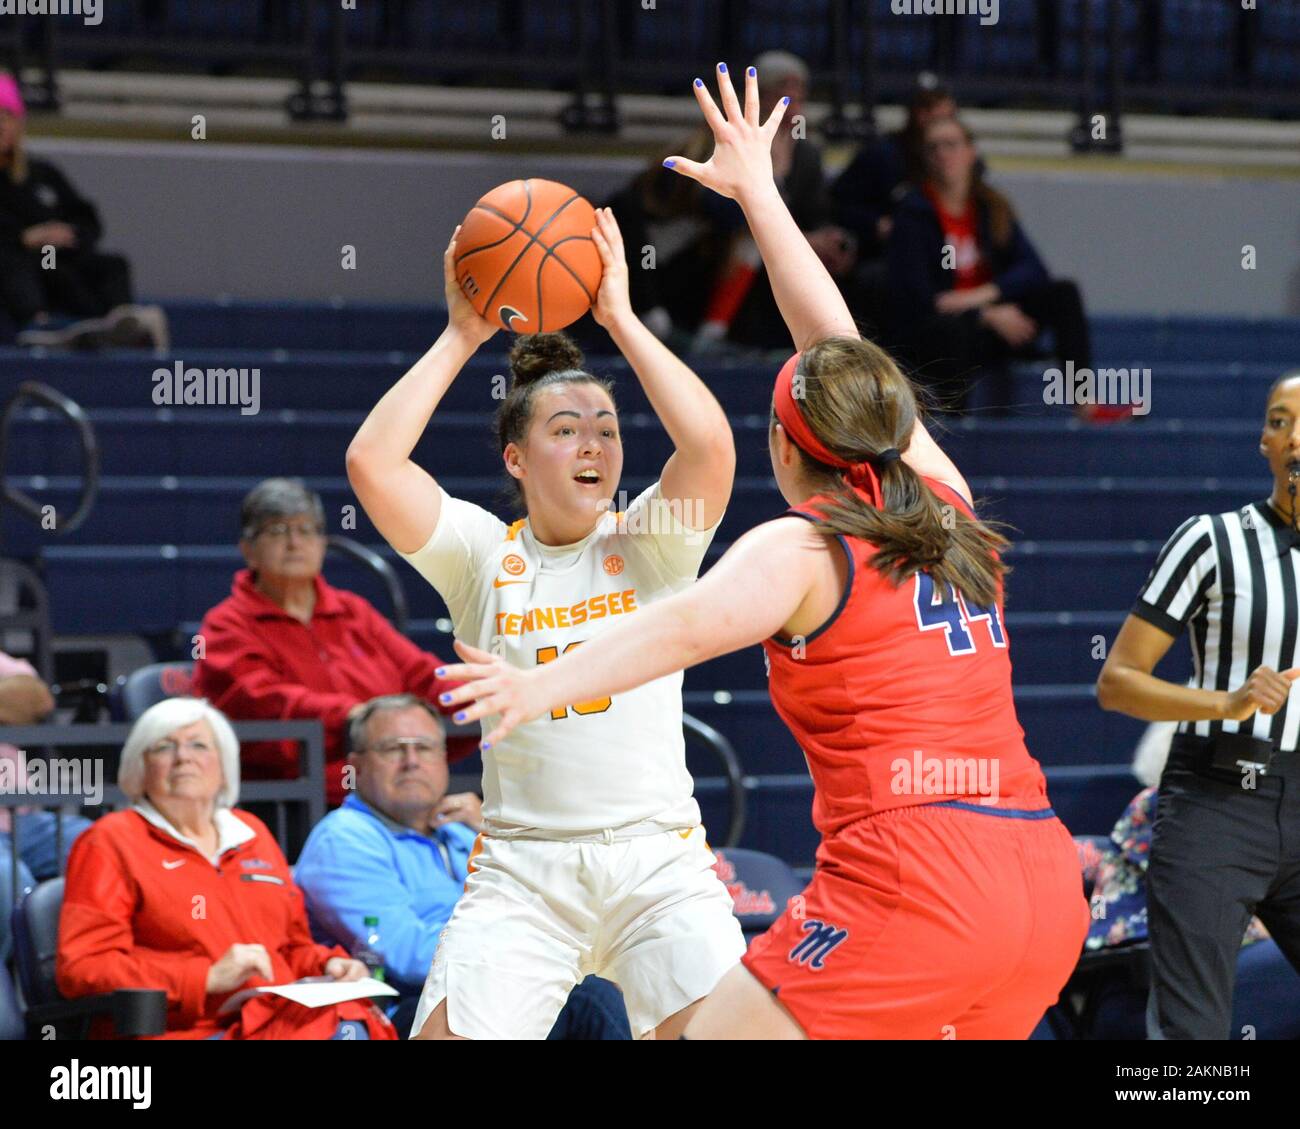 oxford-ms-usa-09th-jan-2020-tennessee-guard-jessie-rennie-10-look-for-an-open-player-during-the-ncaa-womens-basketball-game-between-the-tennessee-lady-volunteers-and-the-ole-miss-rebels-at-the-pavillion-in-oxford-ms-kevin-langleysports-south-mediacsmalamy-live-news-2AKNB1H.jpg